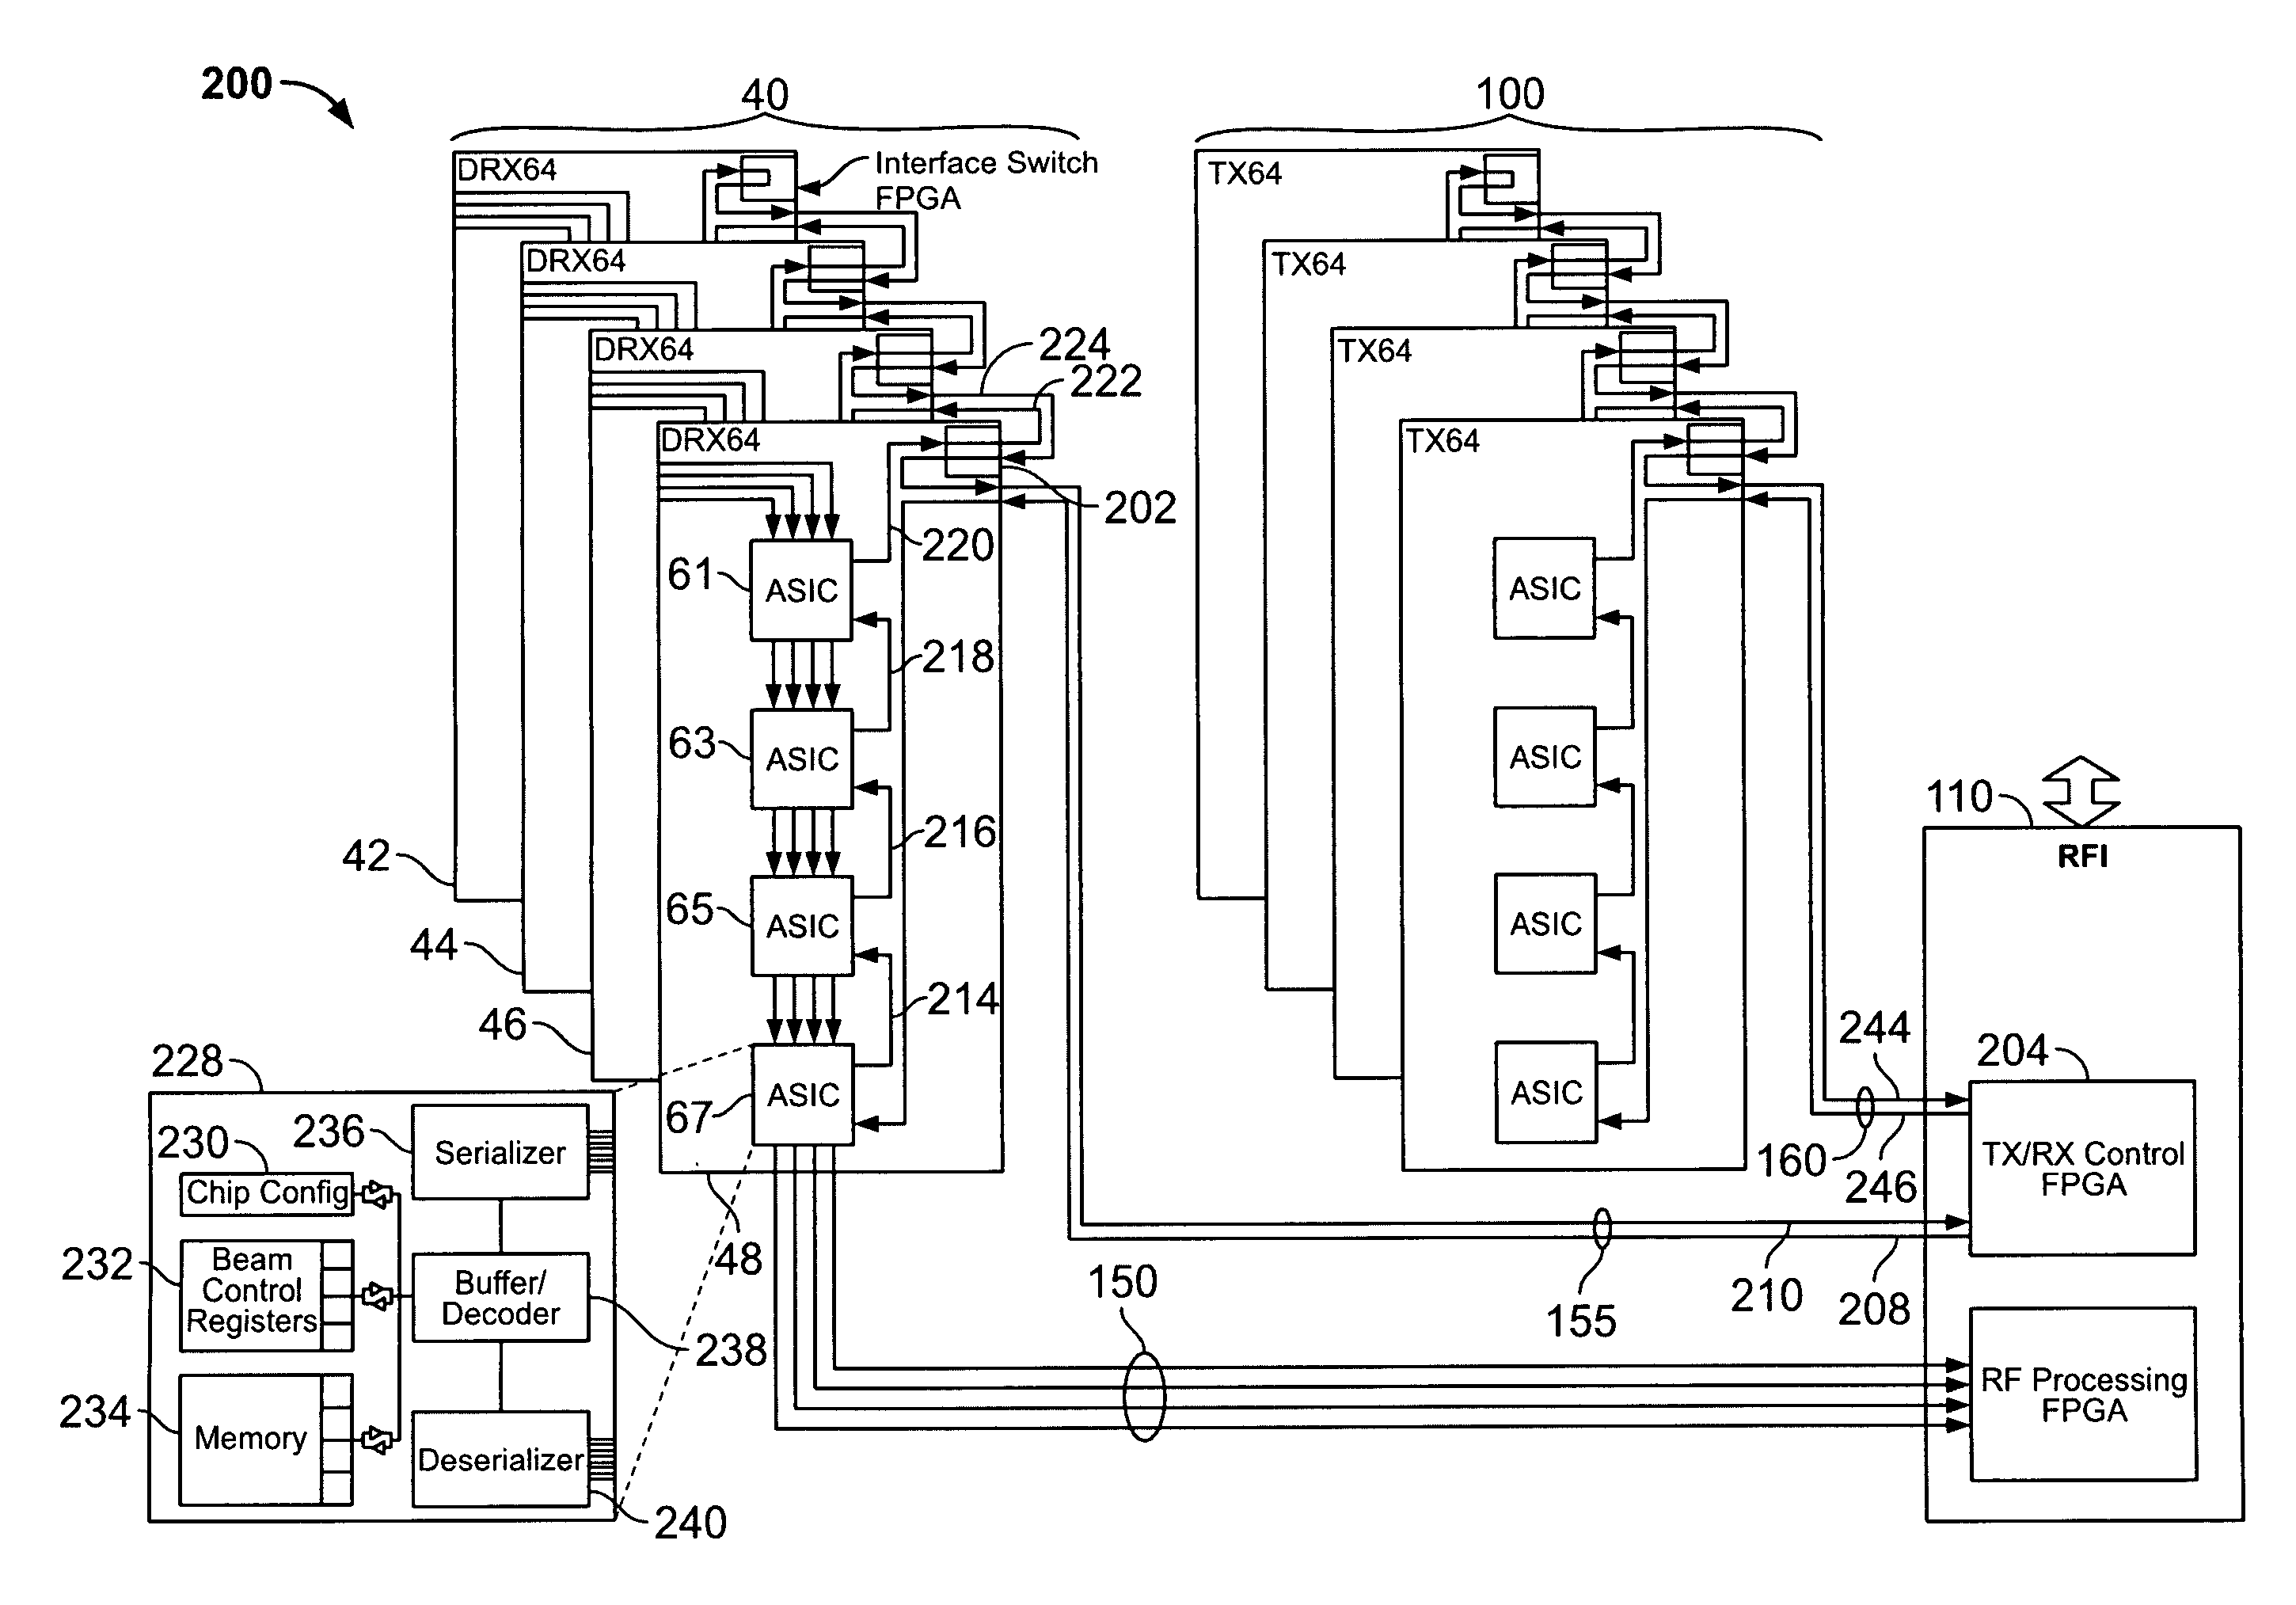 Ultrasound beamformer with high speed serial control bus packetized protocol